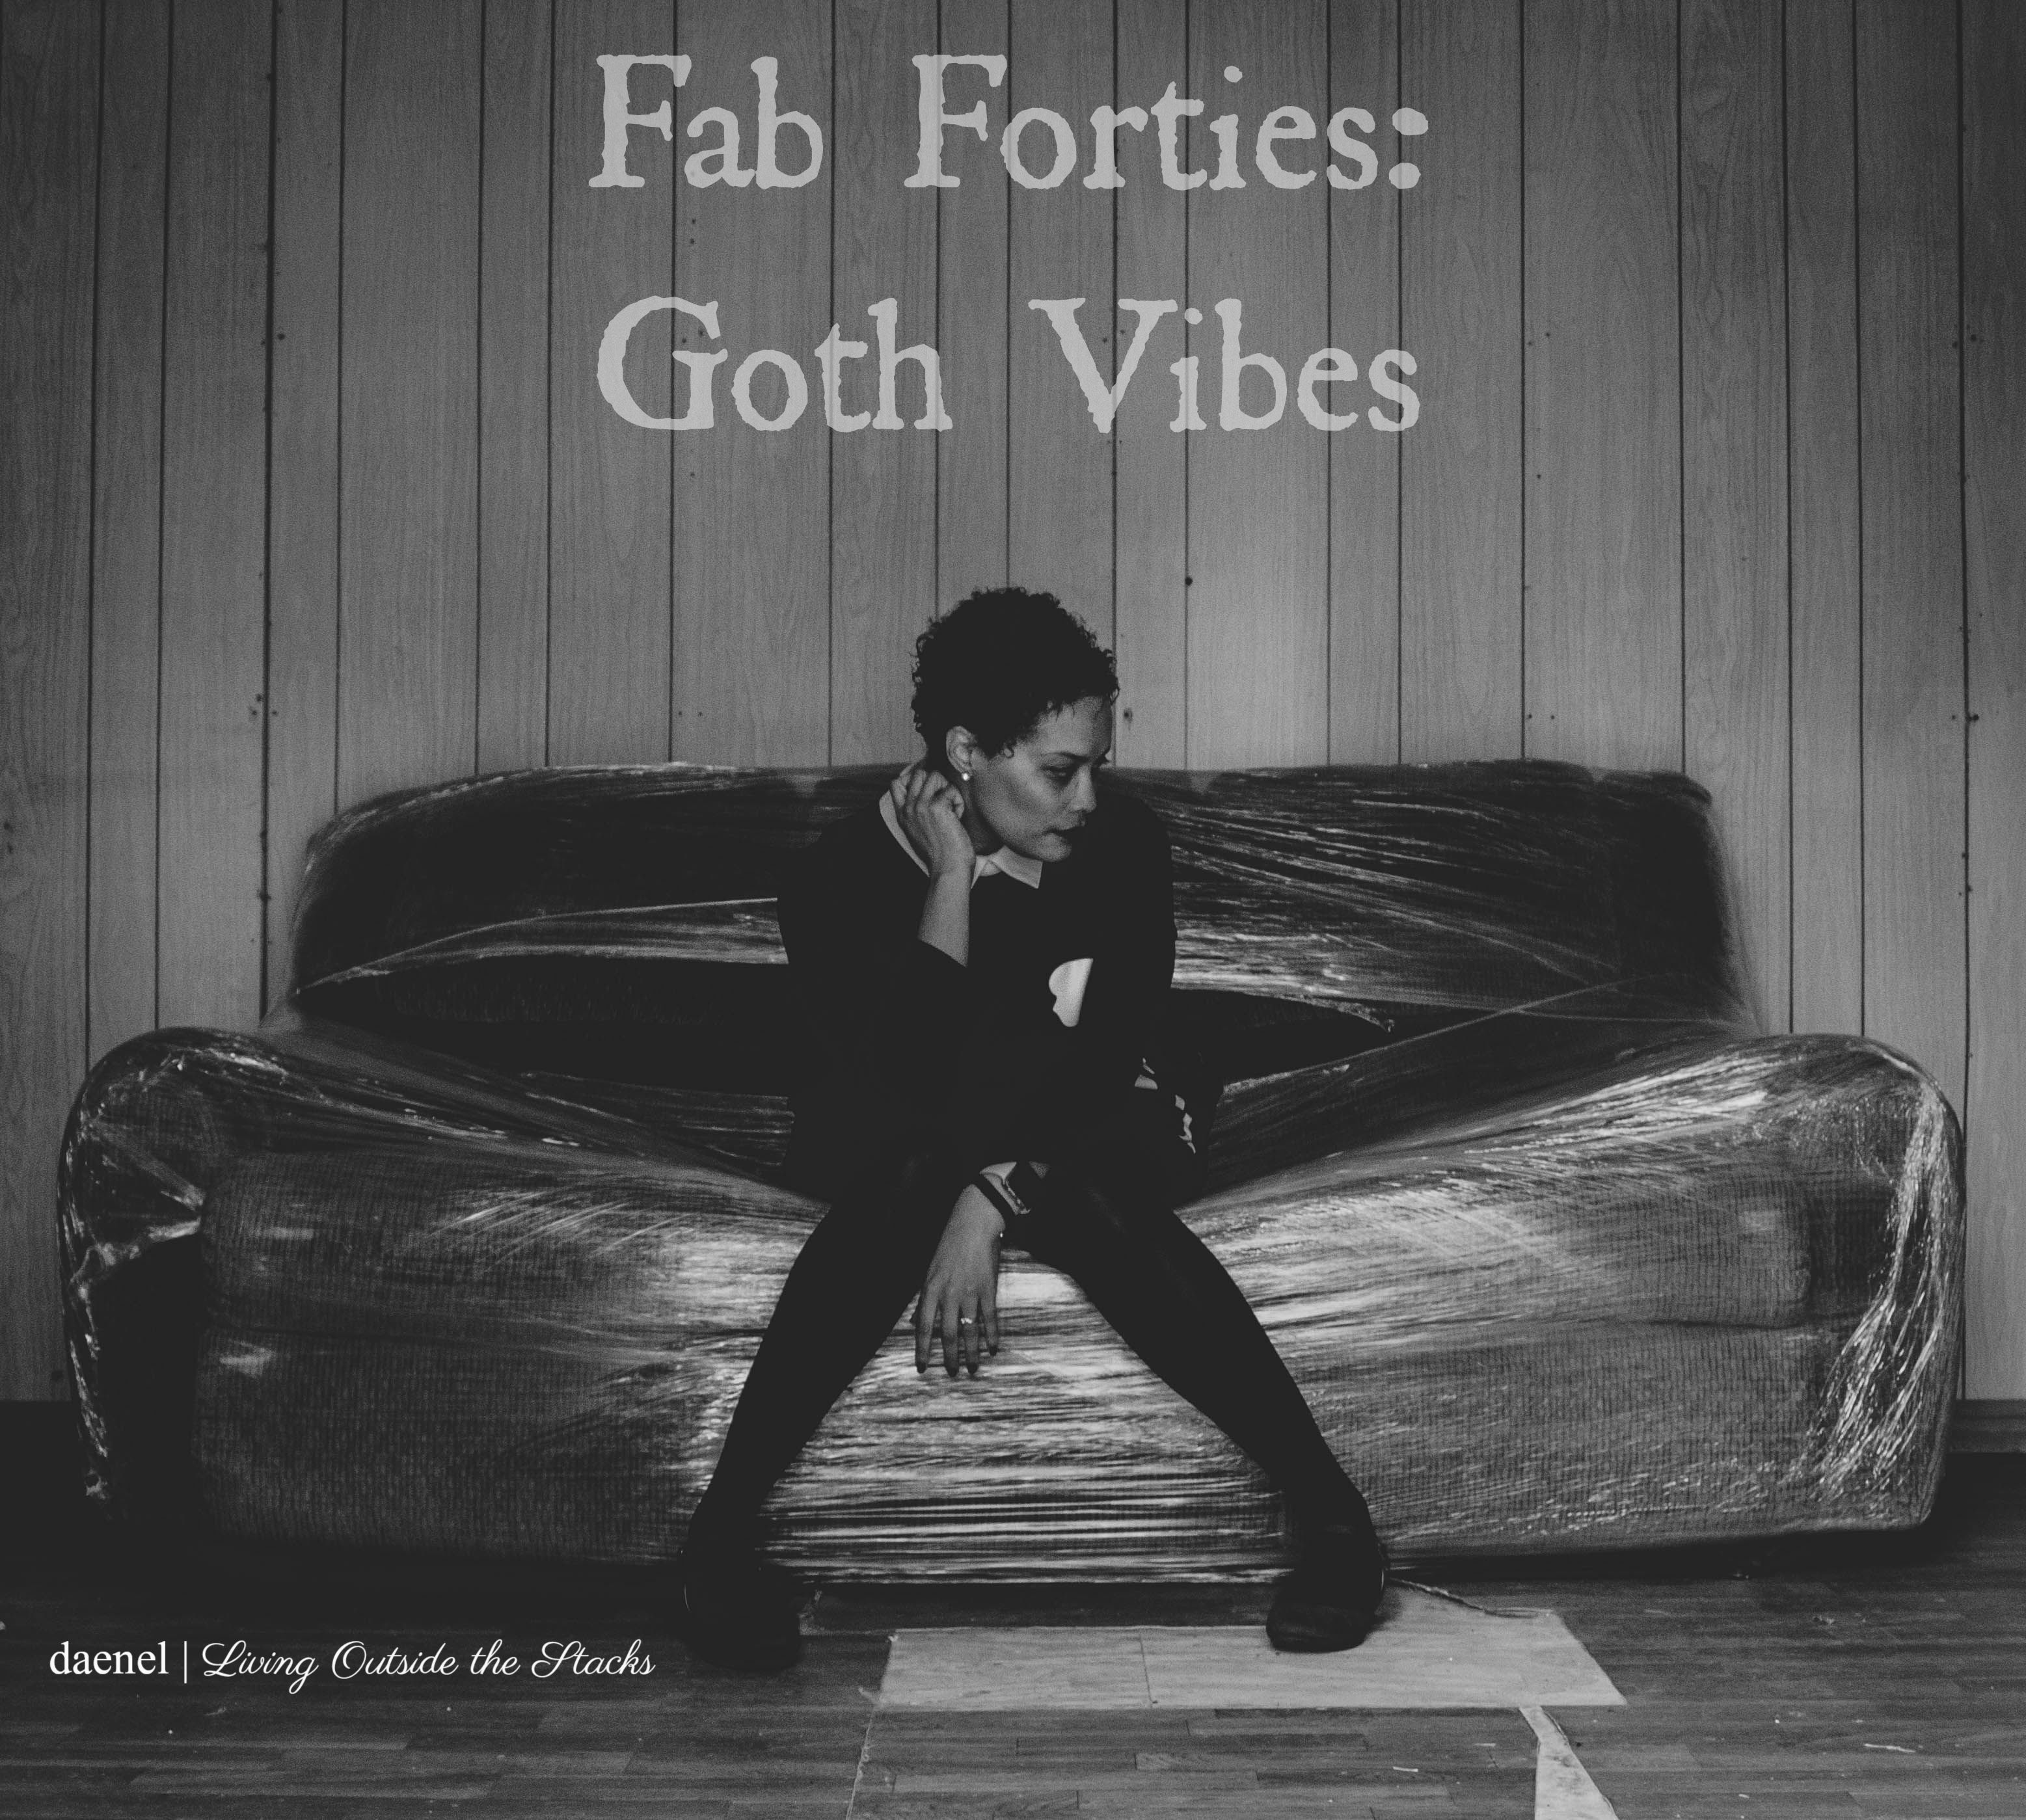  Daenel T {living outside the stacks} Fab Forties - Goth Vibes